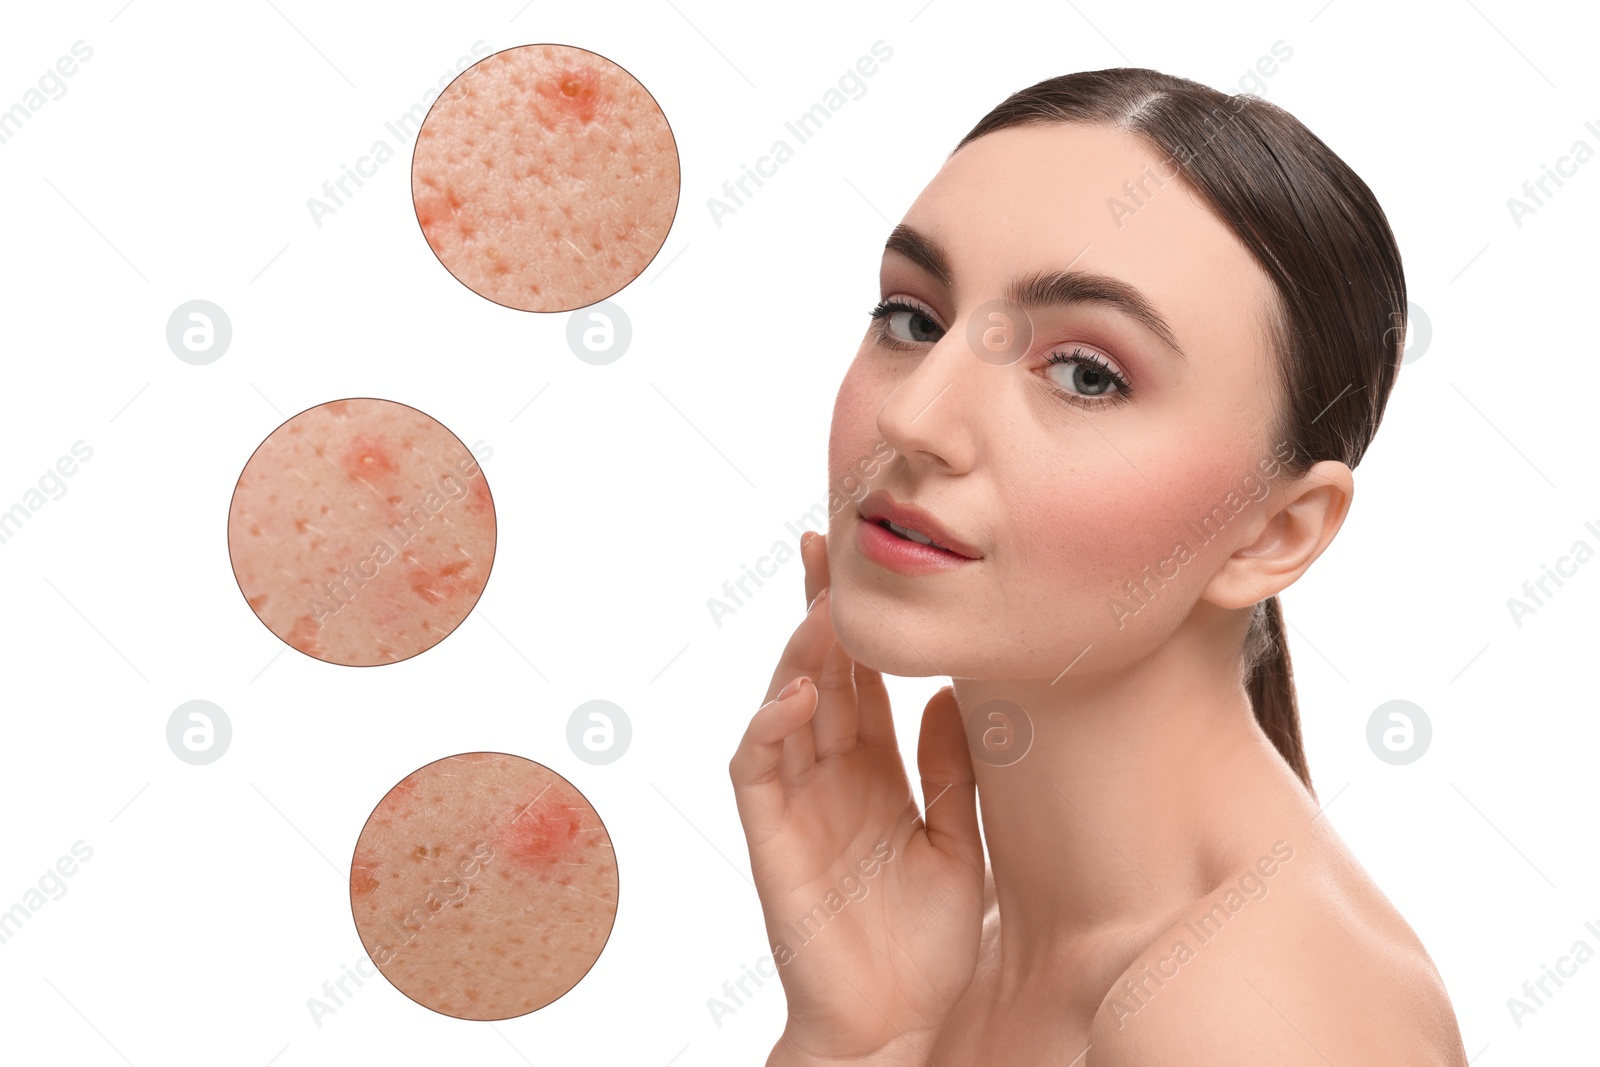 Image of Dermatology. Woman with skin problem on white background. Zoomed areas showing acne